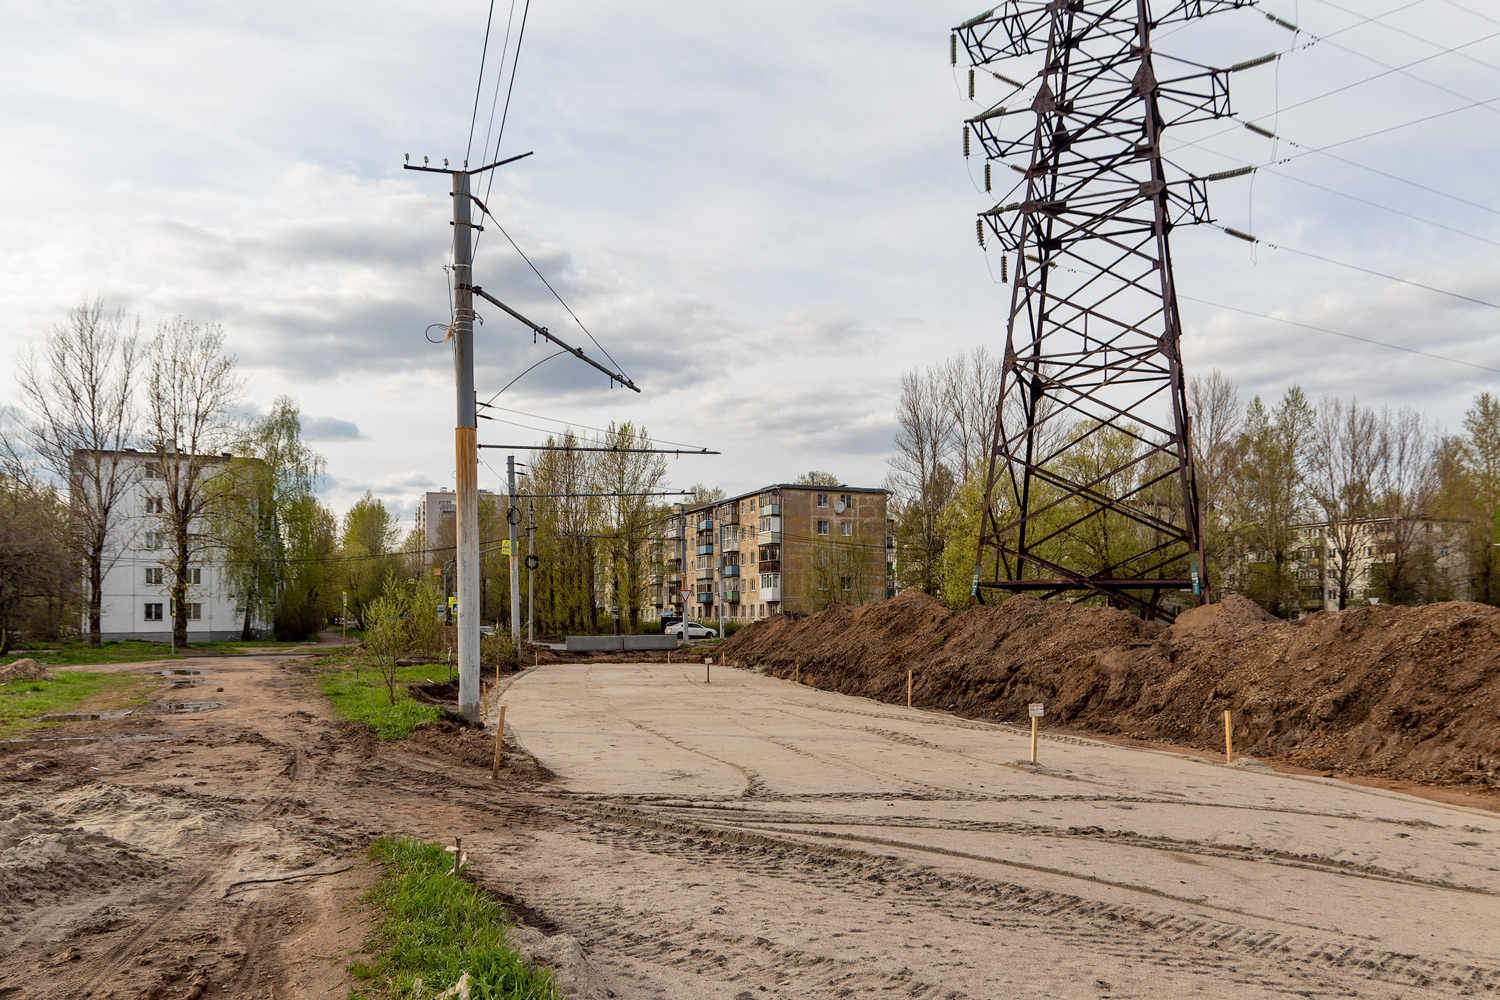 Jaroslawl — Reconstruction of the tram lines under the concession agreement. Stage #1